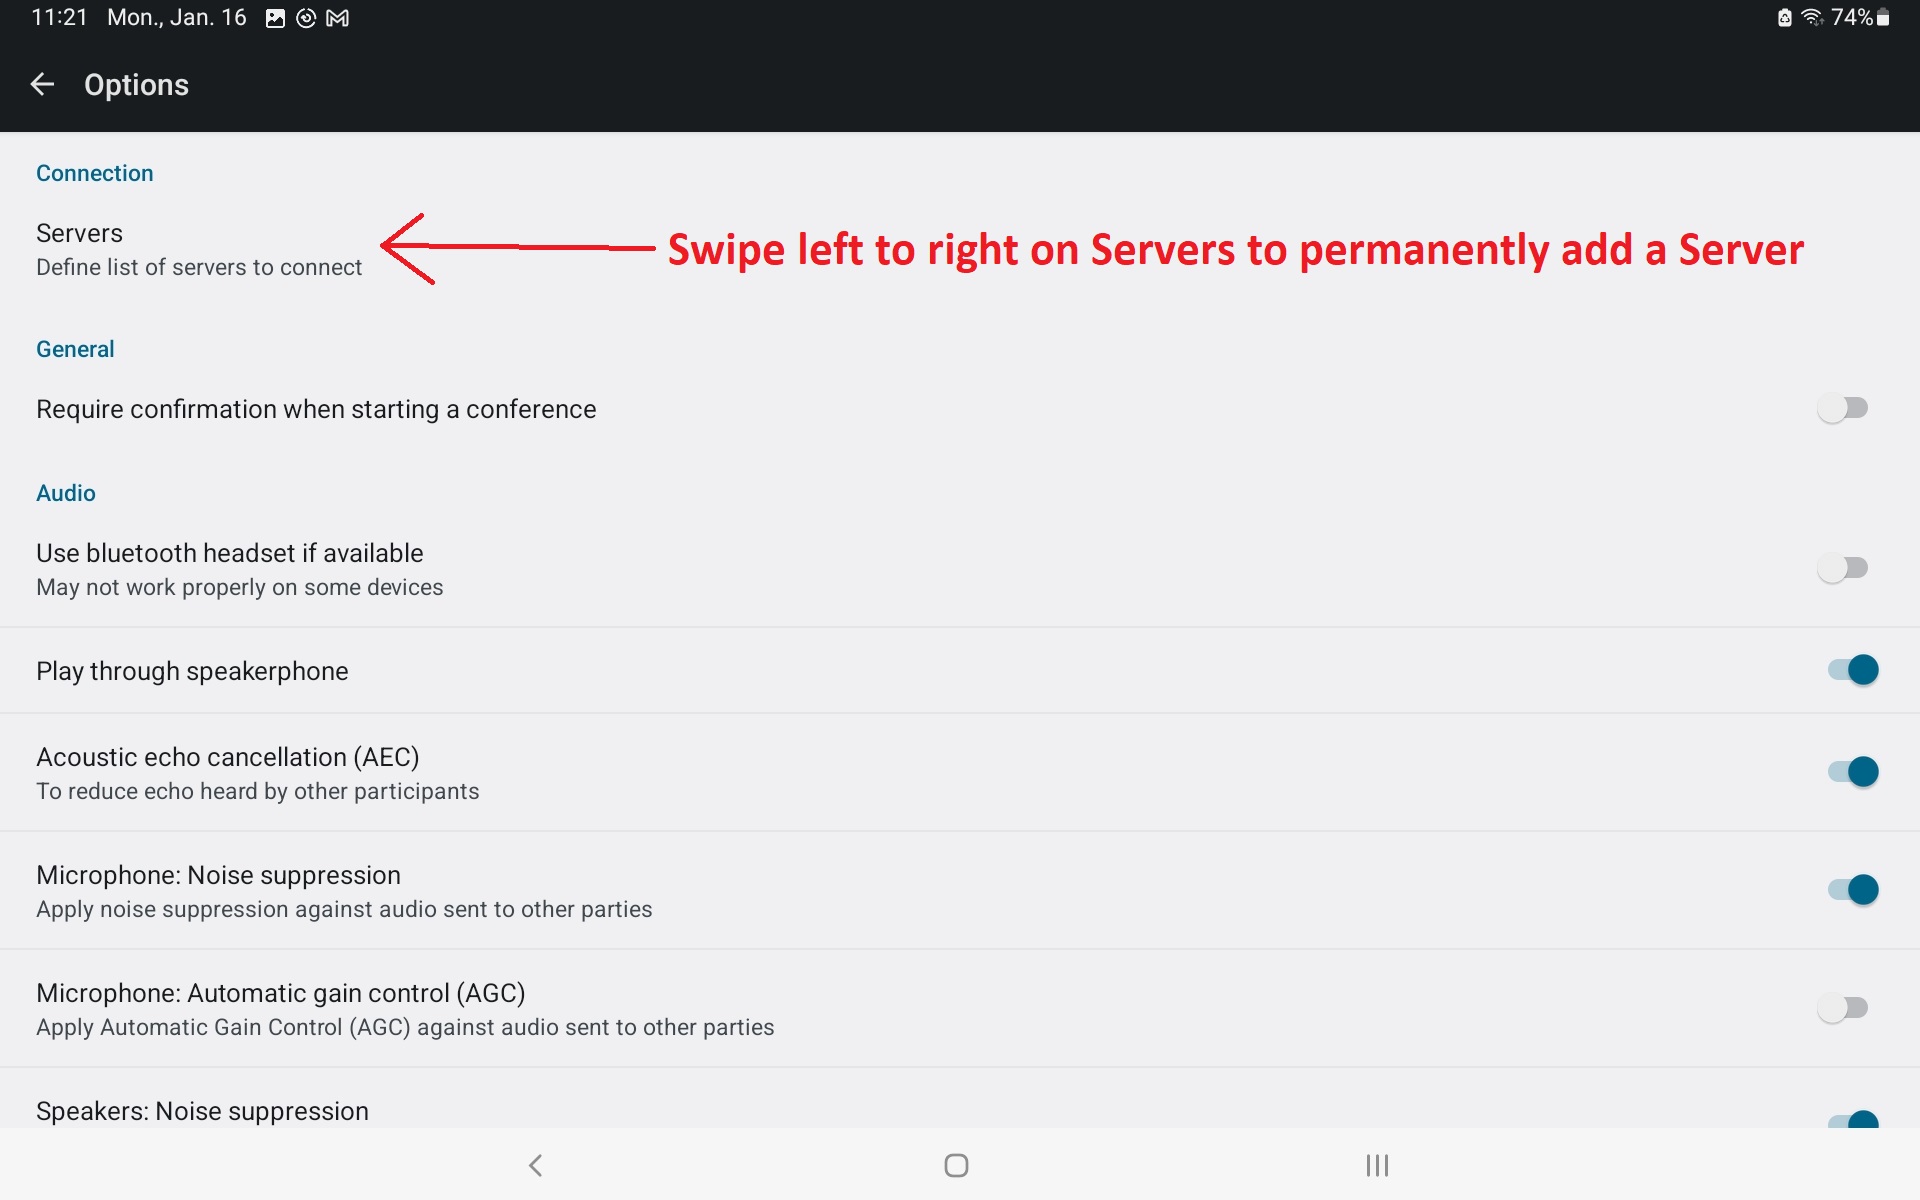 Swipe to Select the Server Options.